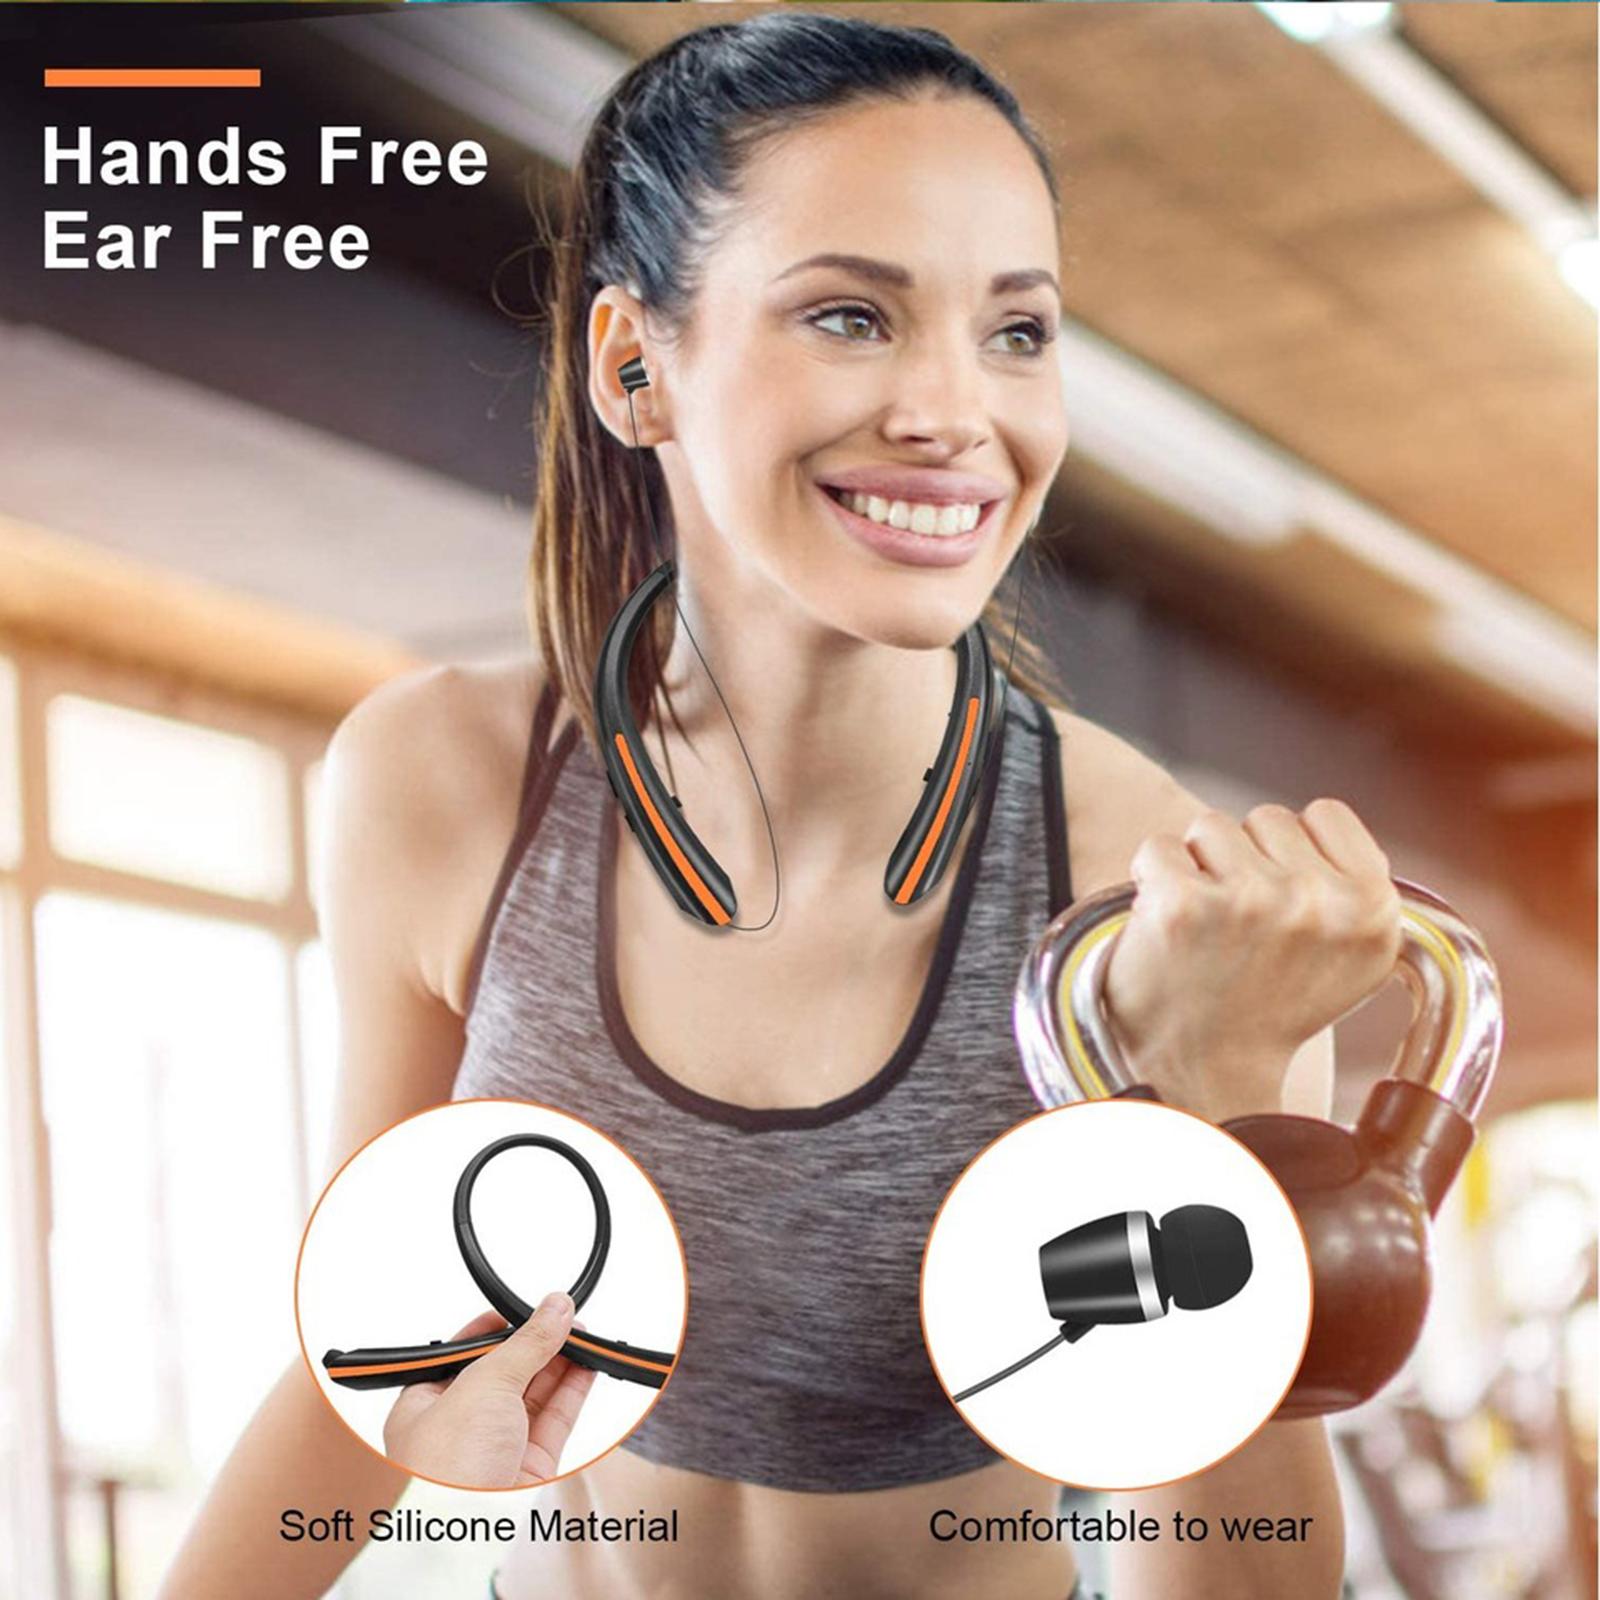 Stereo Wireless Bluetooth Headphone Headset with Mic Neckband Earbuds Sport